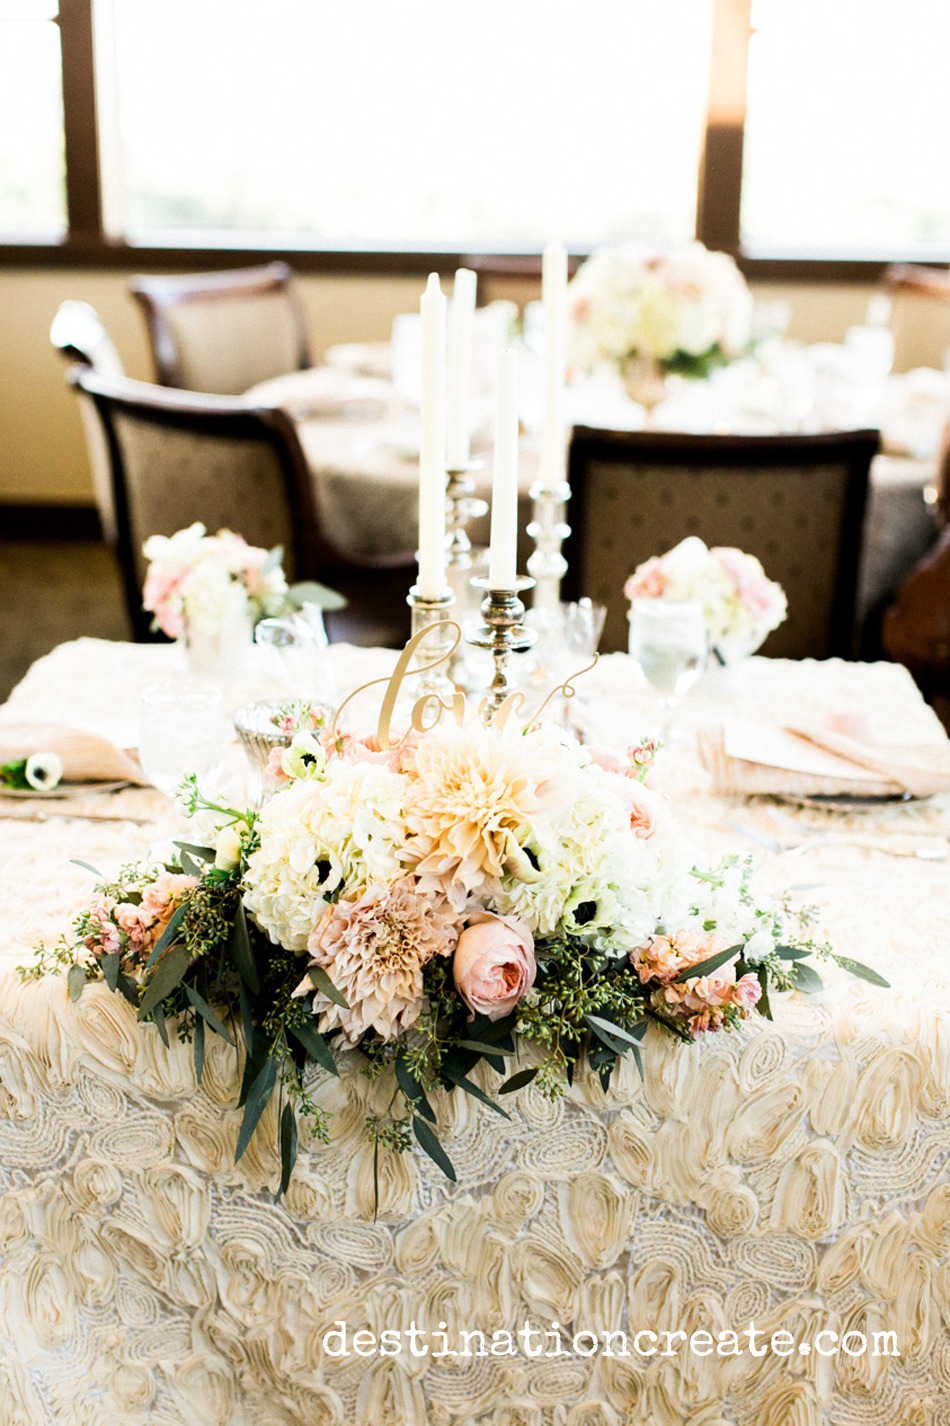 Lush, romantic centerpieces rise above champagne crinkle linens and fill the room with elegance at this gold and blush wedding in Golden Colorado held at Rolling Hills Country Club